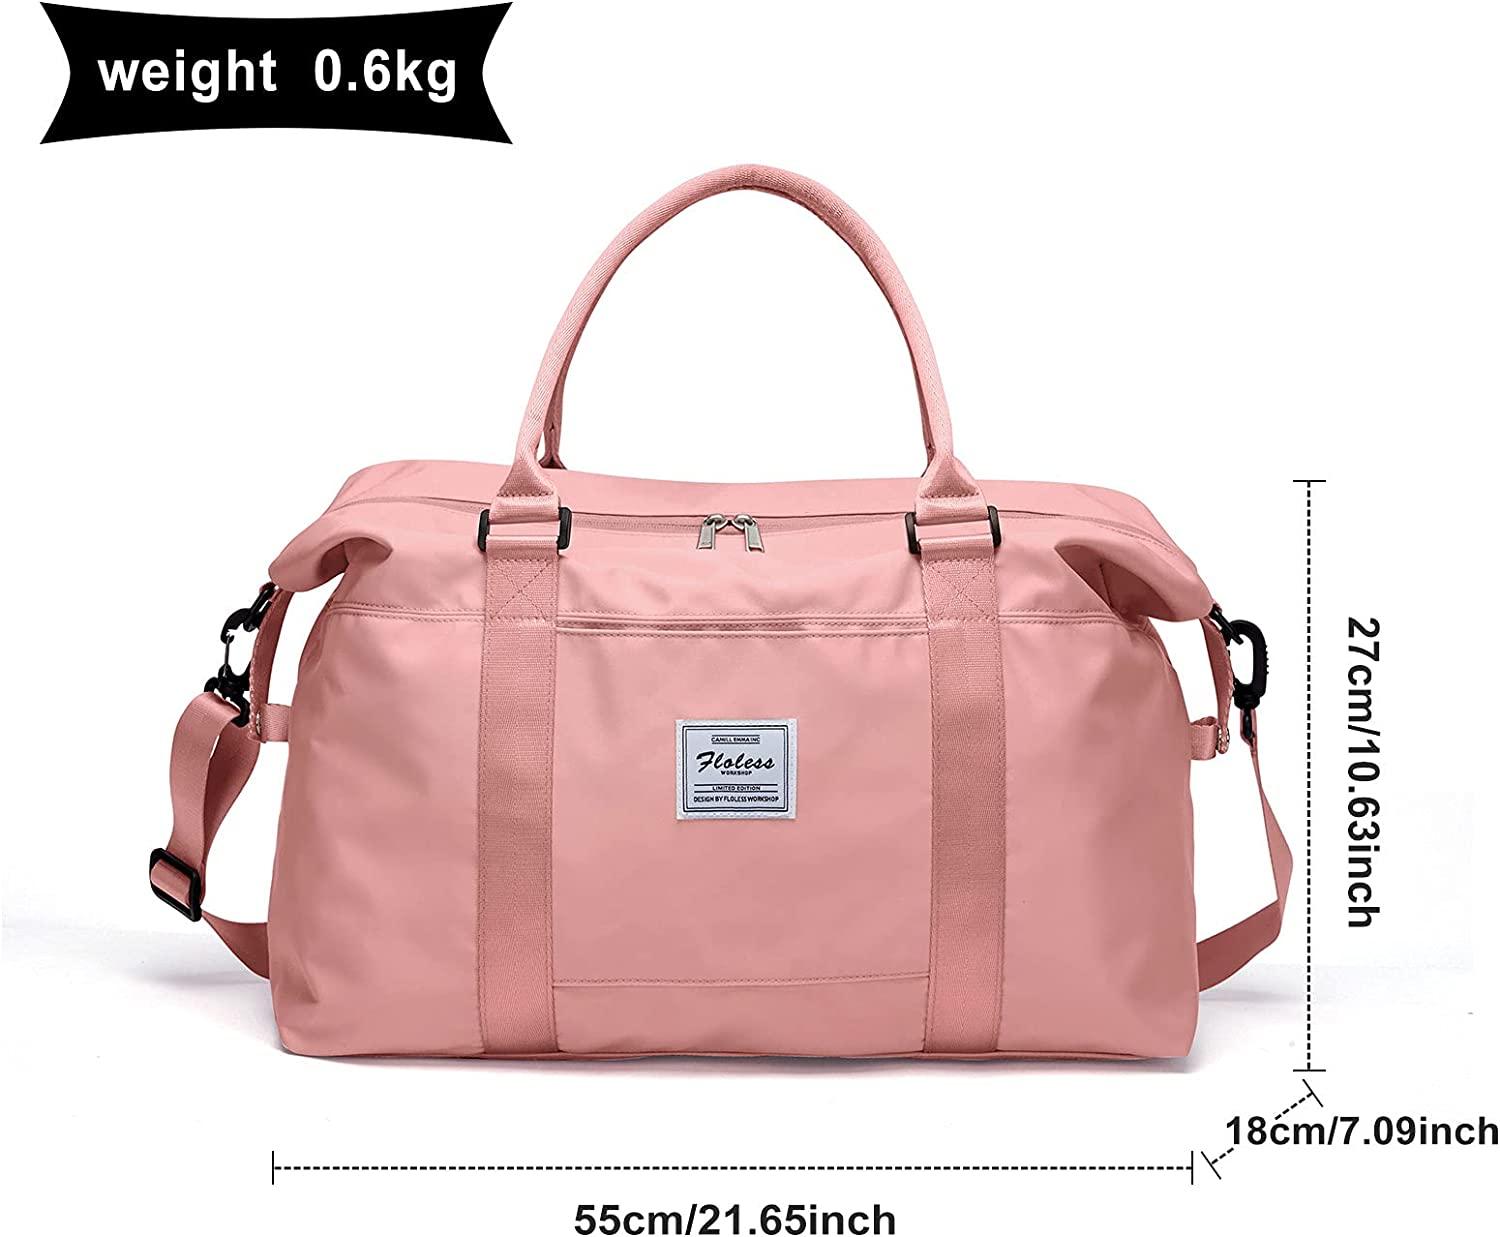 SYCNB Womens Travel Bags, Weekender Carry on for Women, Sports Gym Bag, Workout Duffel Bag, Overnight Shoulder Bag Fit 15.6 inch Laptop (Large, Leaves